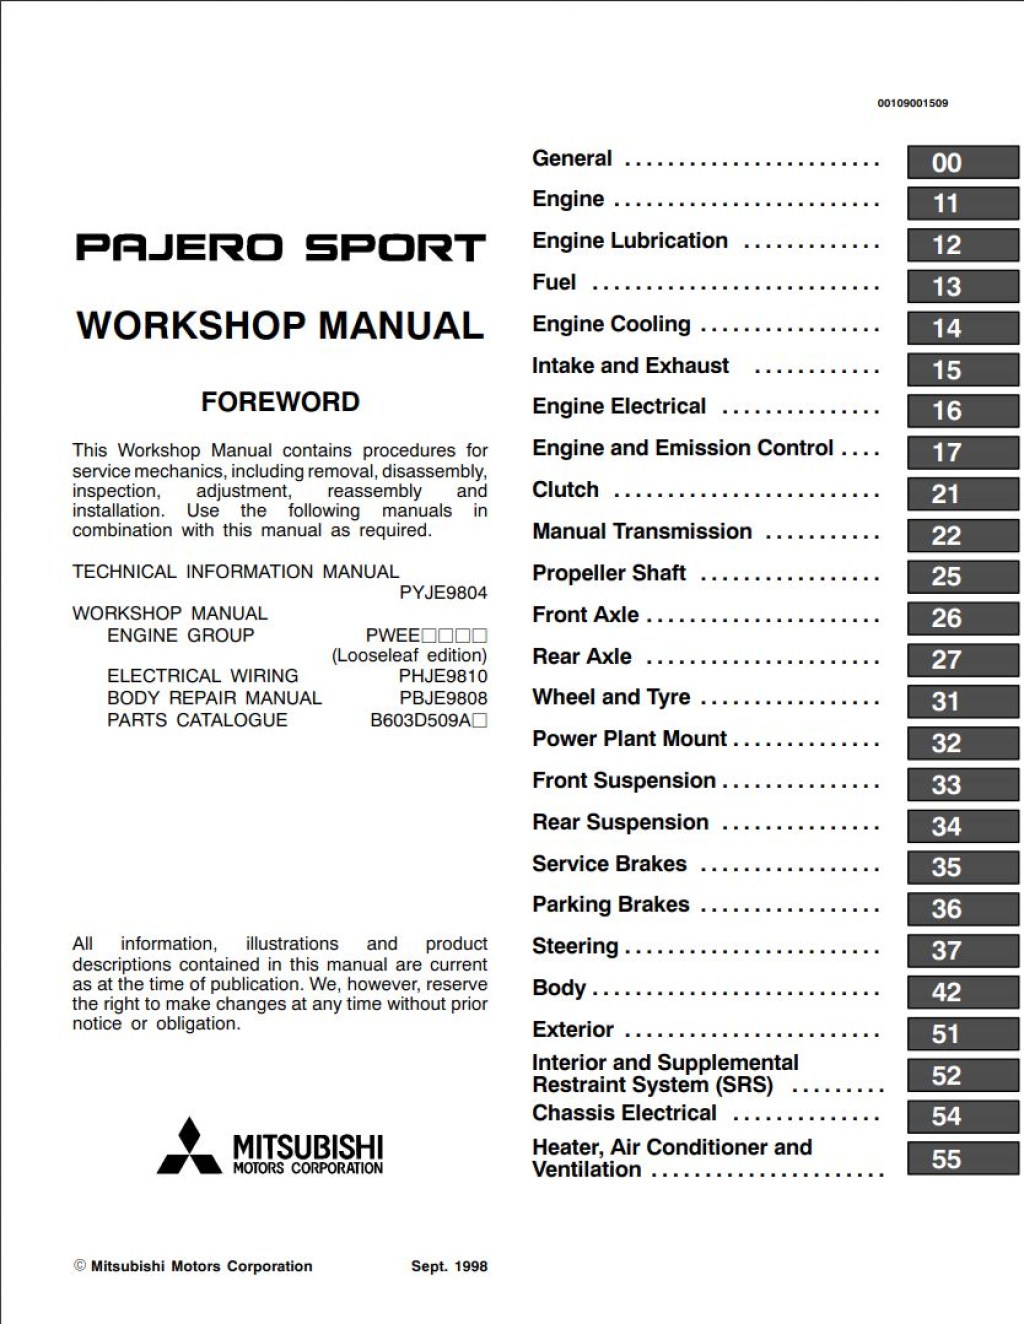 Picture of: Mitsubishi Pajero Sport Workshop Manual – Download In PDF For Free